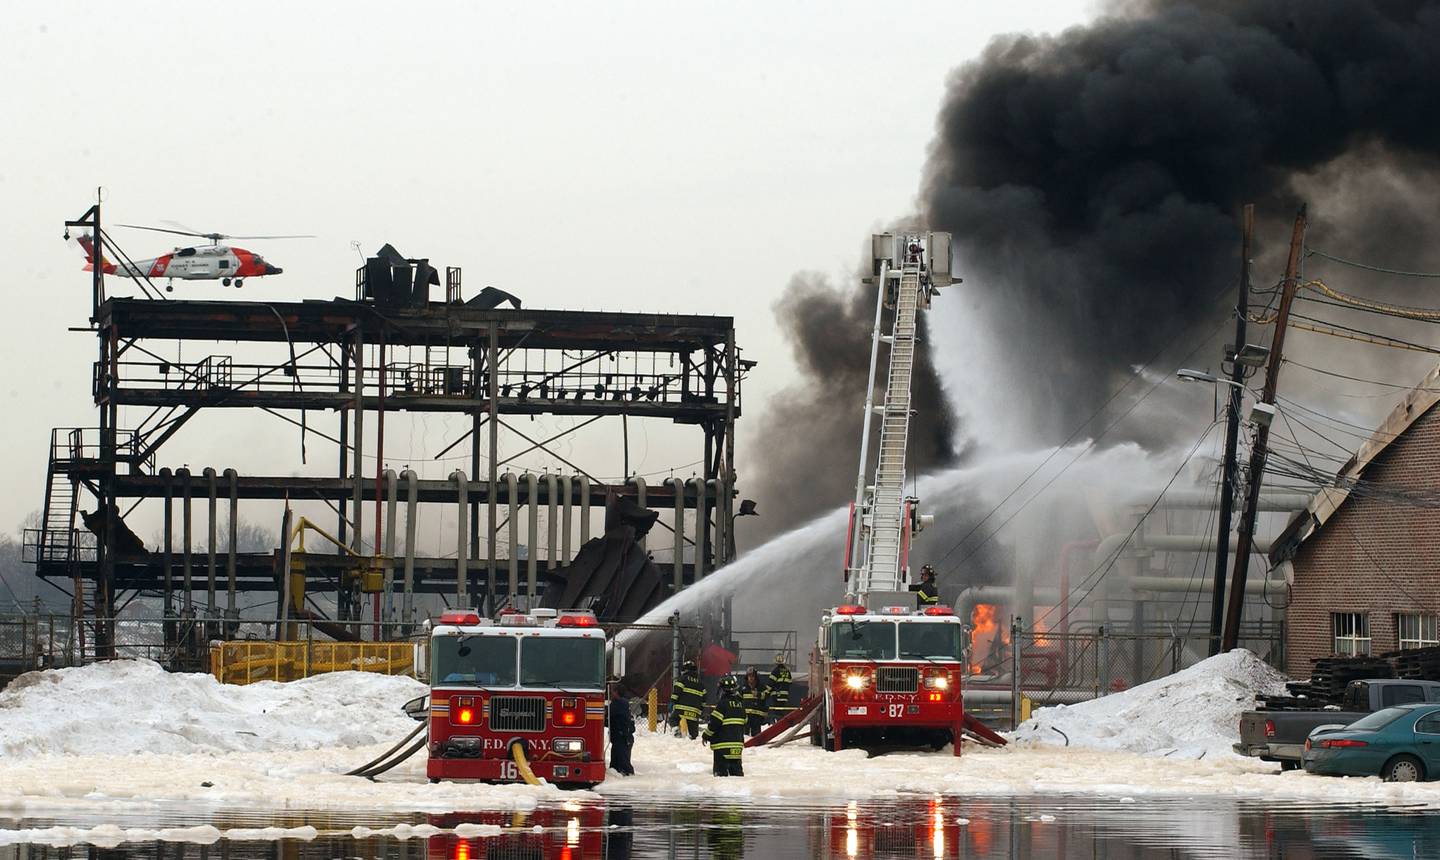 A U.S. Coast Guard rescue helicopter flies over Bouchard Barge 125 shortly after it exploded at the ExxonMobil petroleum storage facility February 21, 2003 in the Staten Island borough of New York City.